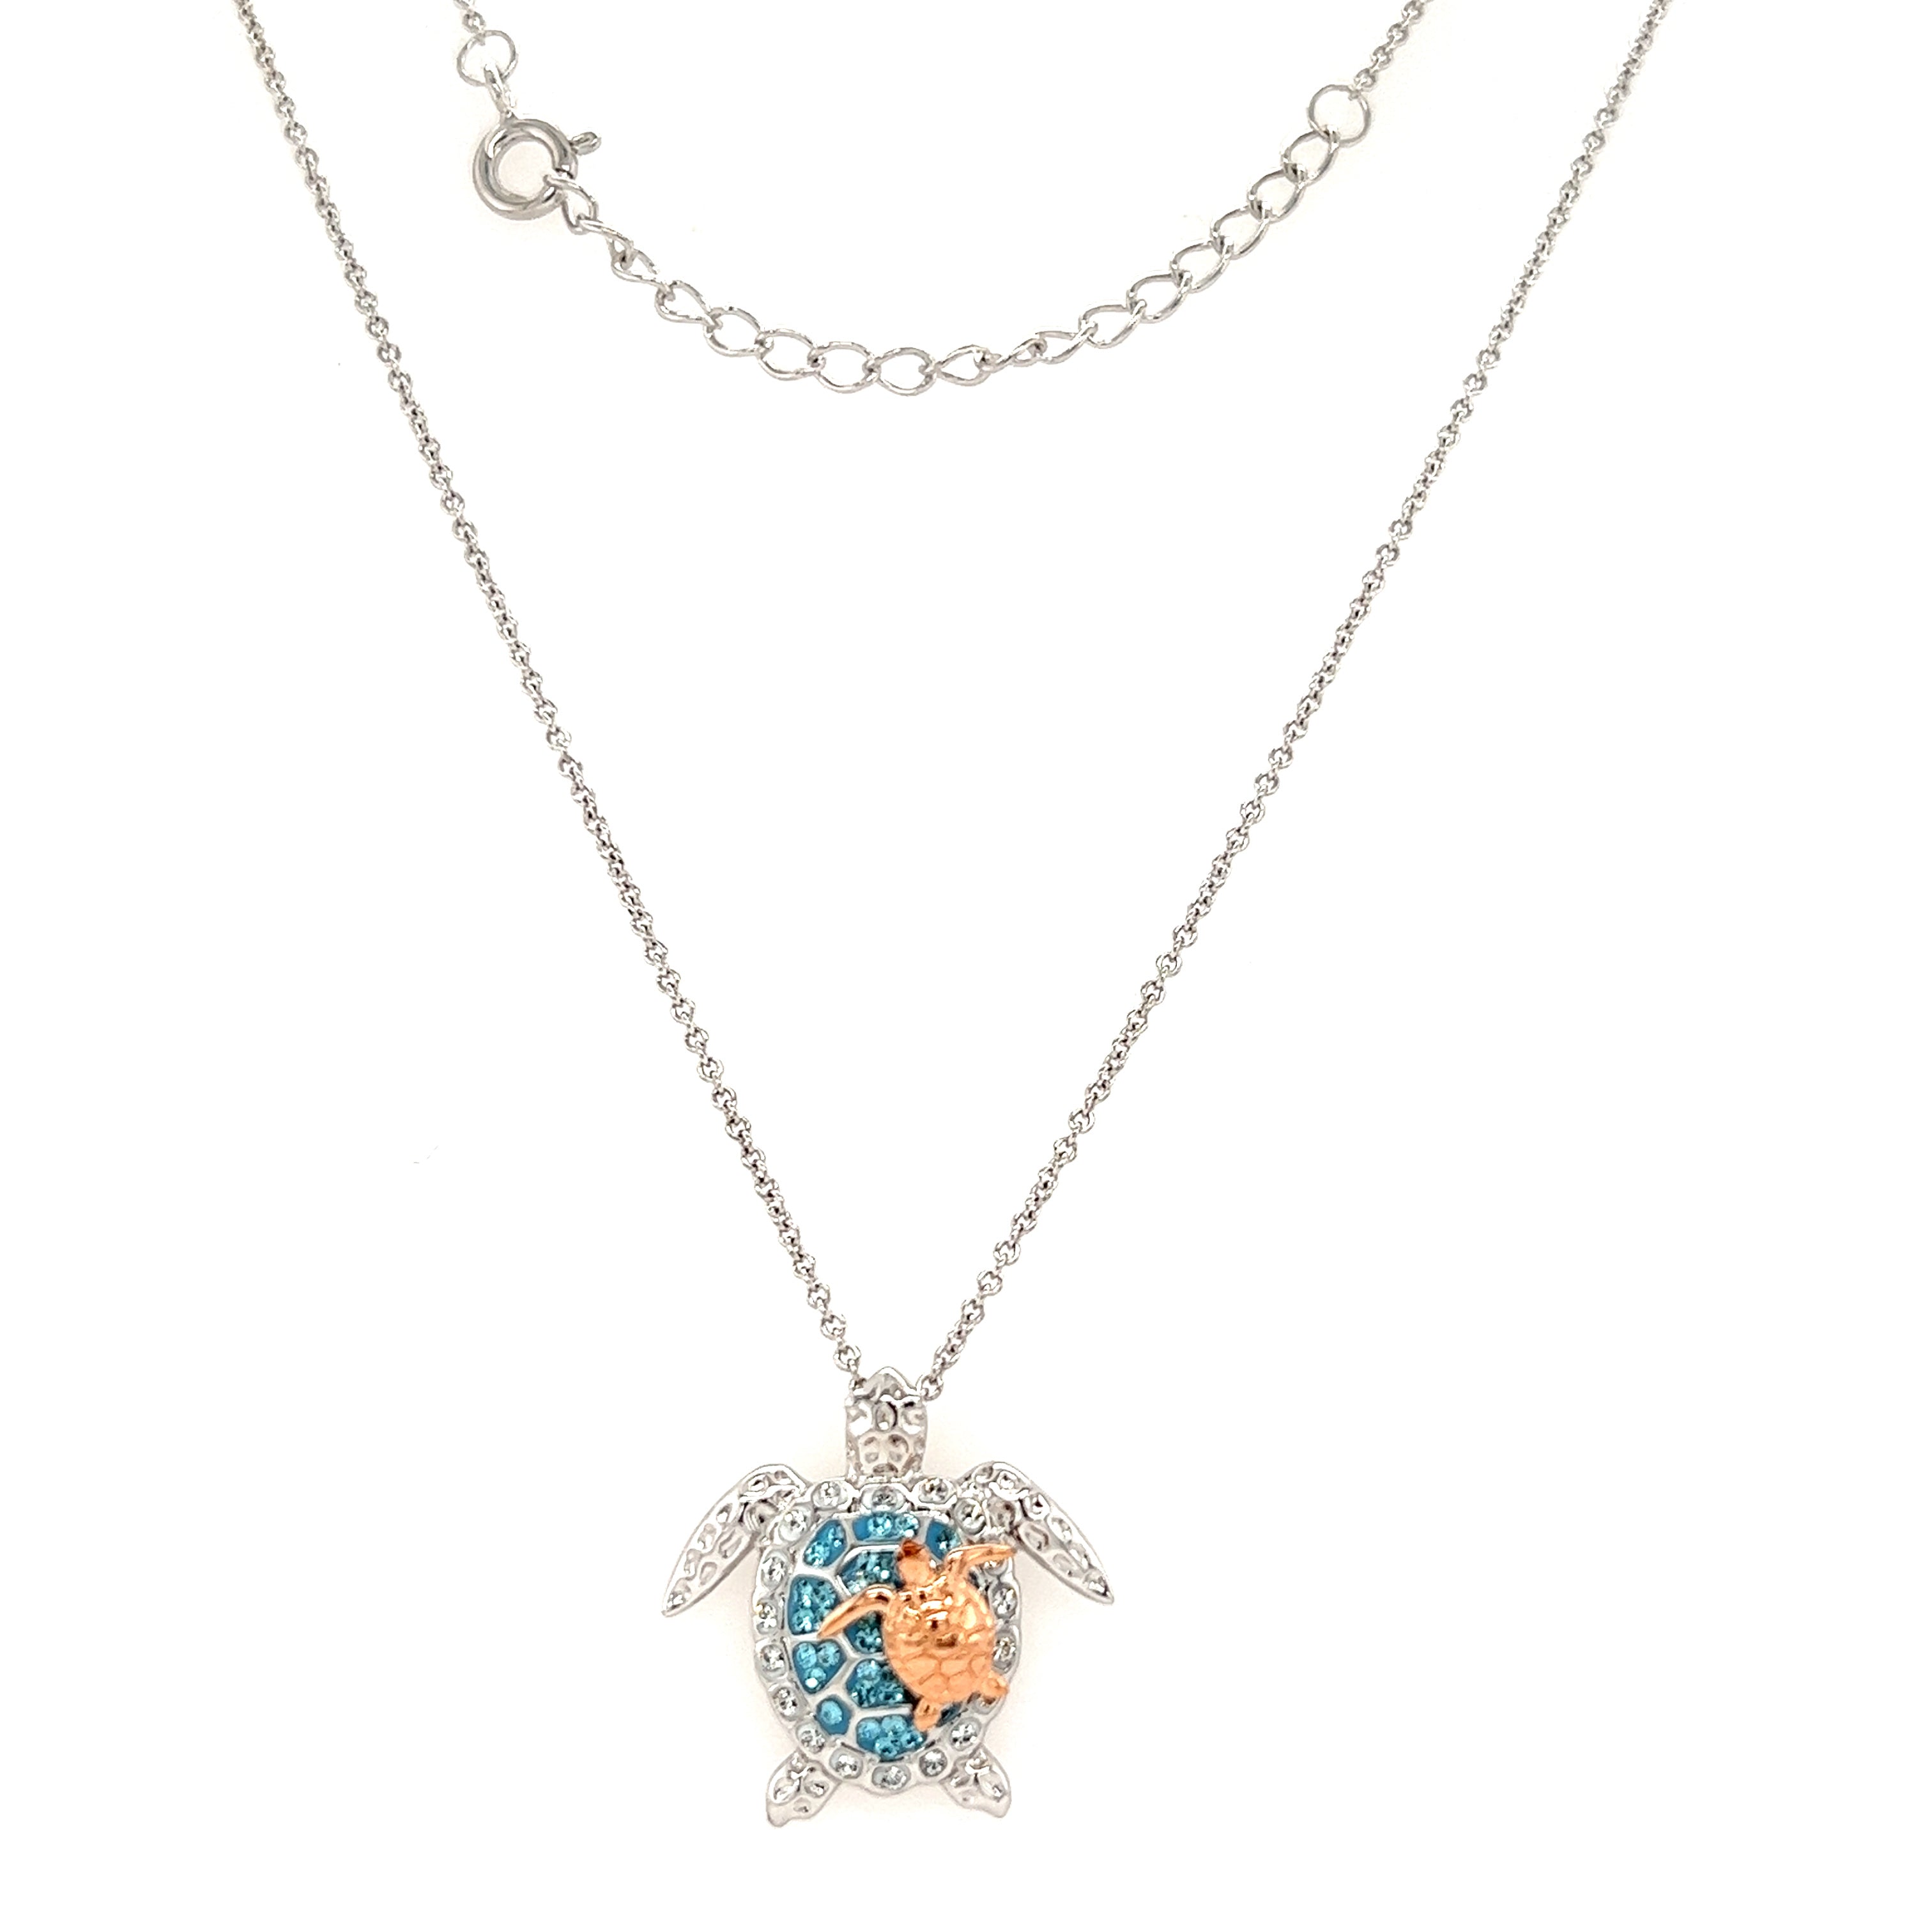 SEA TURTLE CHARM NECKLACE STERLING SILVER – THE MOONFLOWER STUDIO